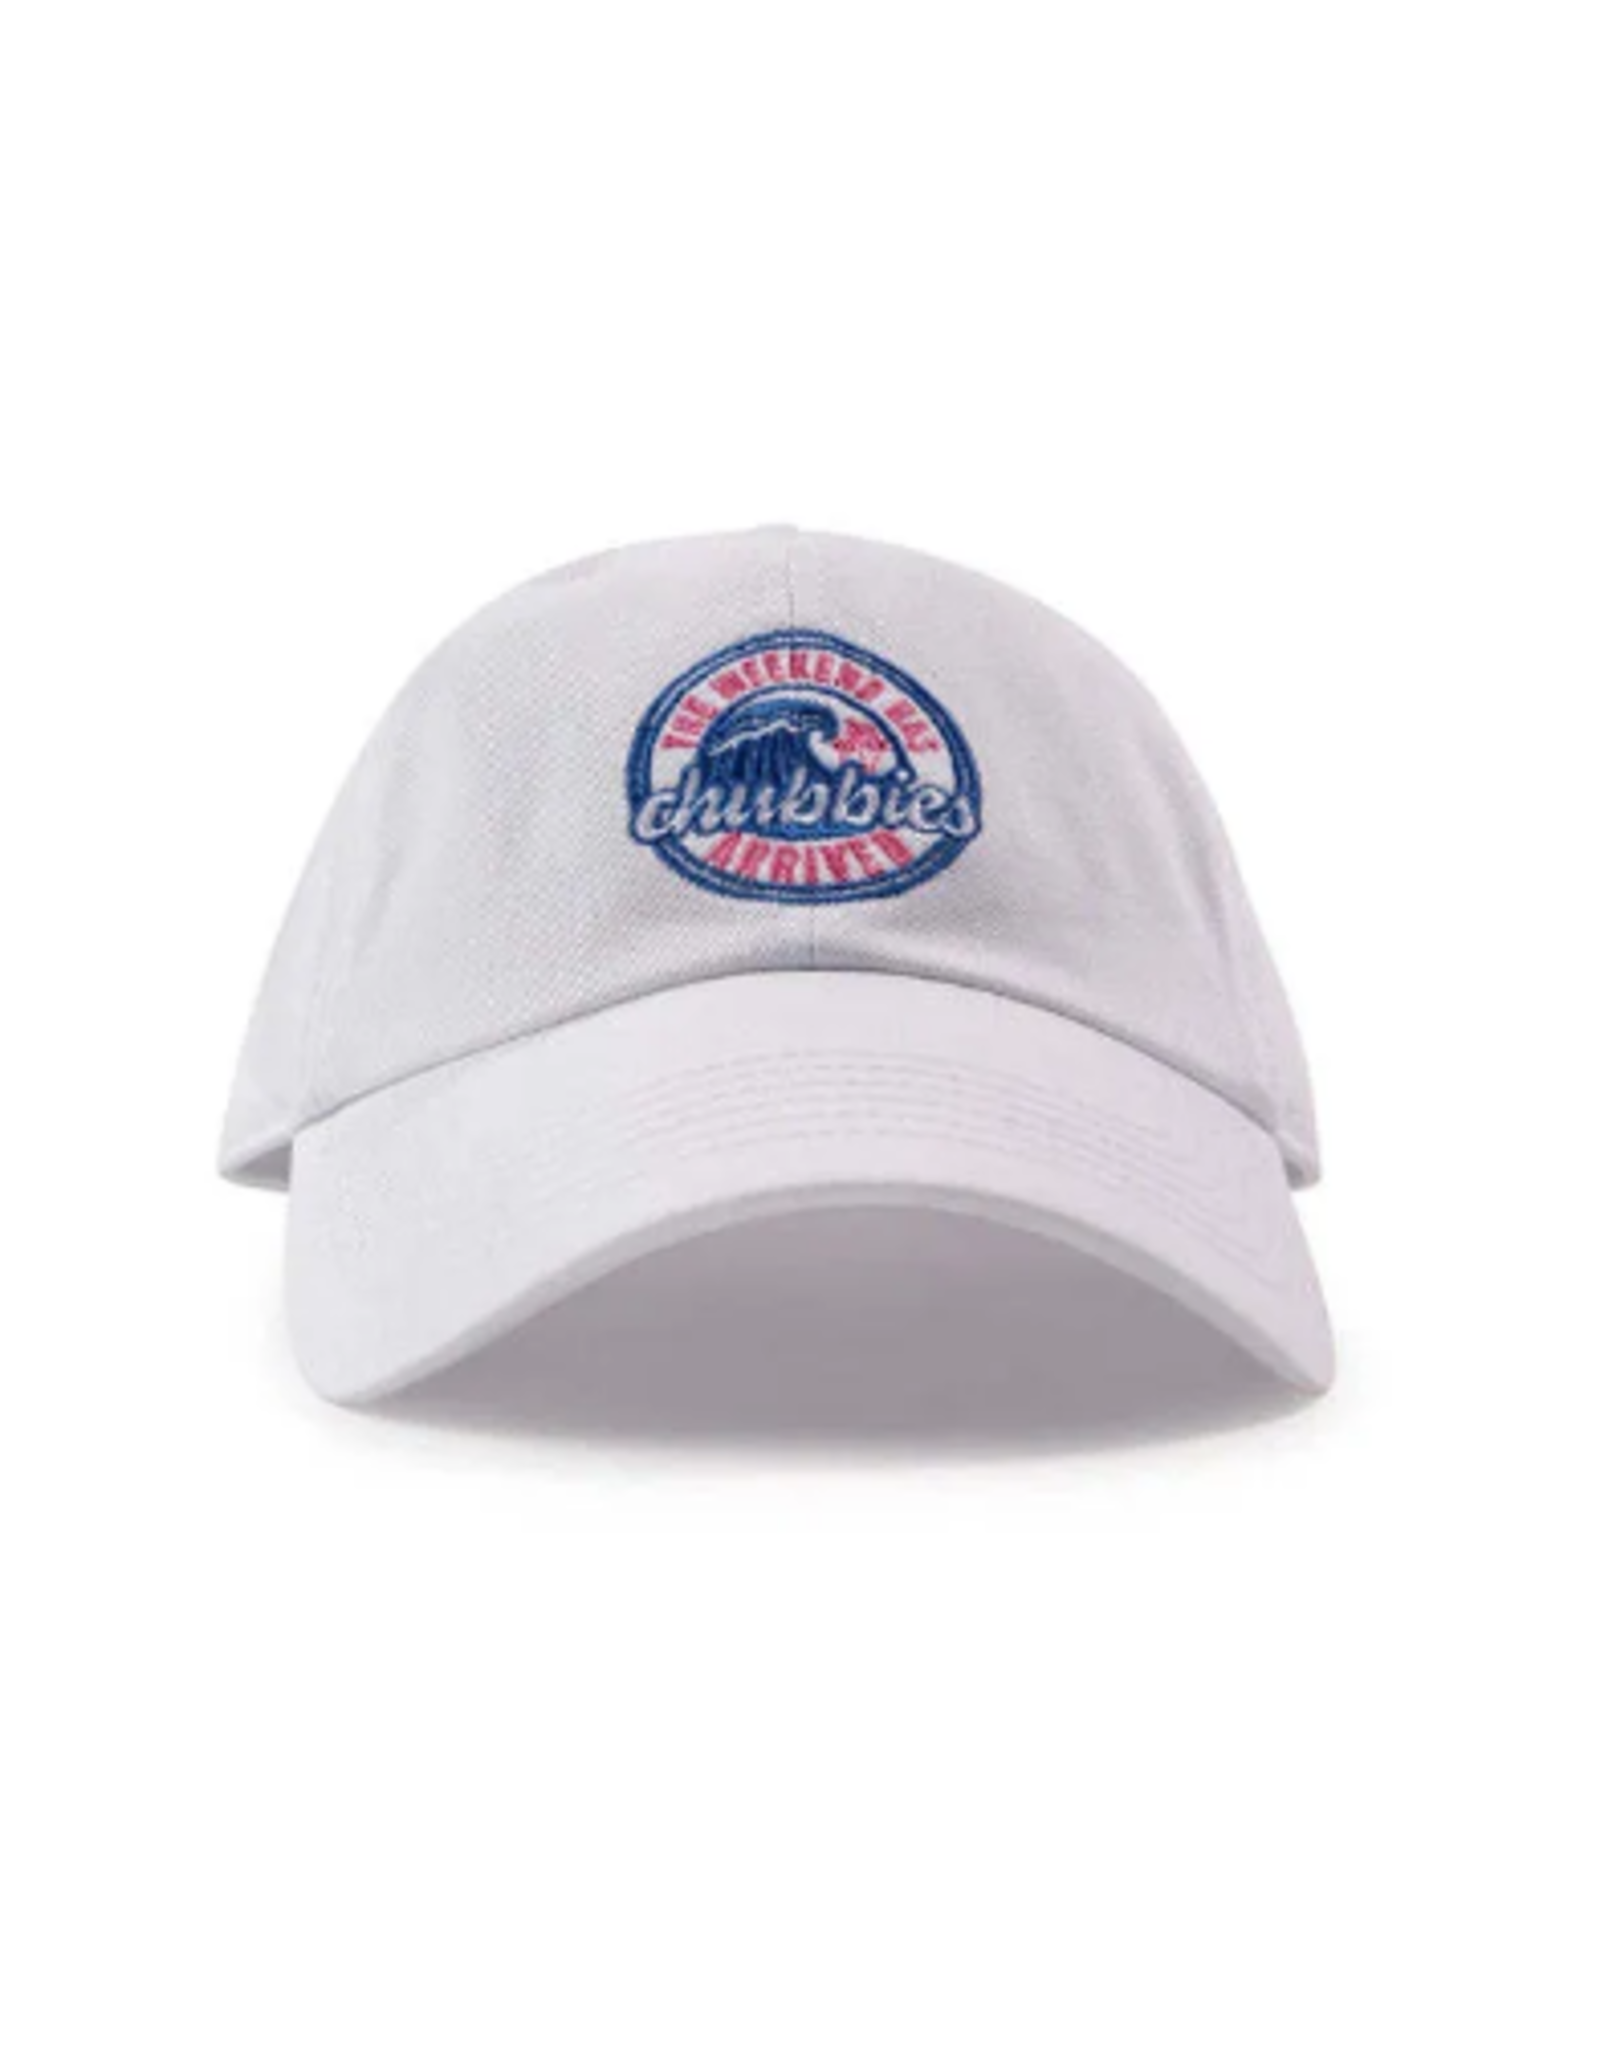 Chubbies Chubbies Weekend Has Arrived Dad Hat